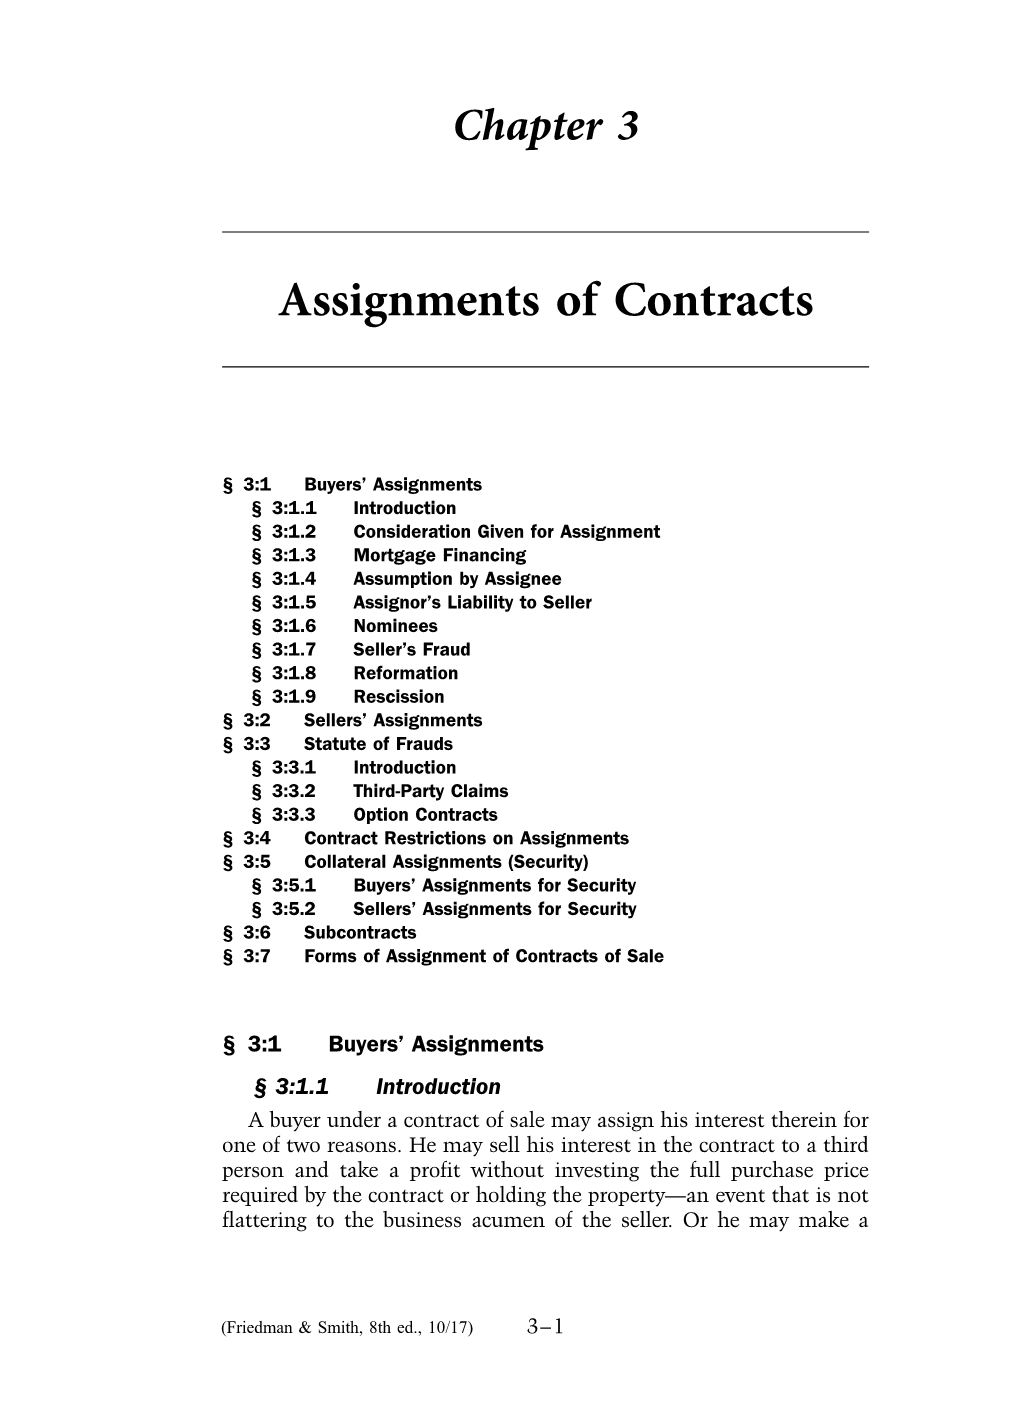 Assignments of Contracts